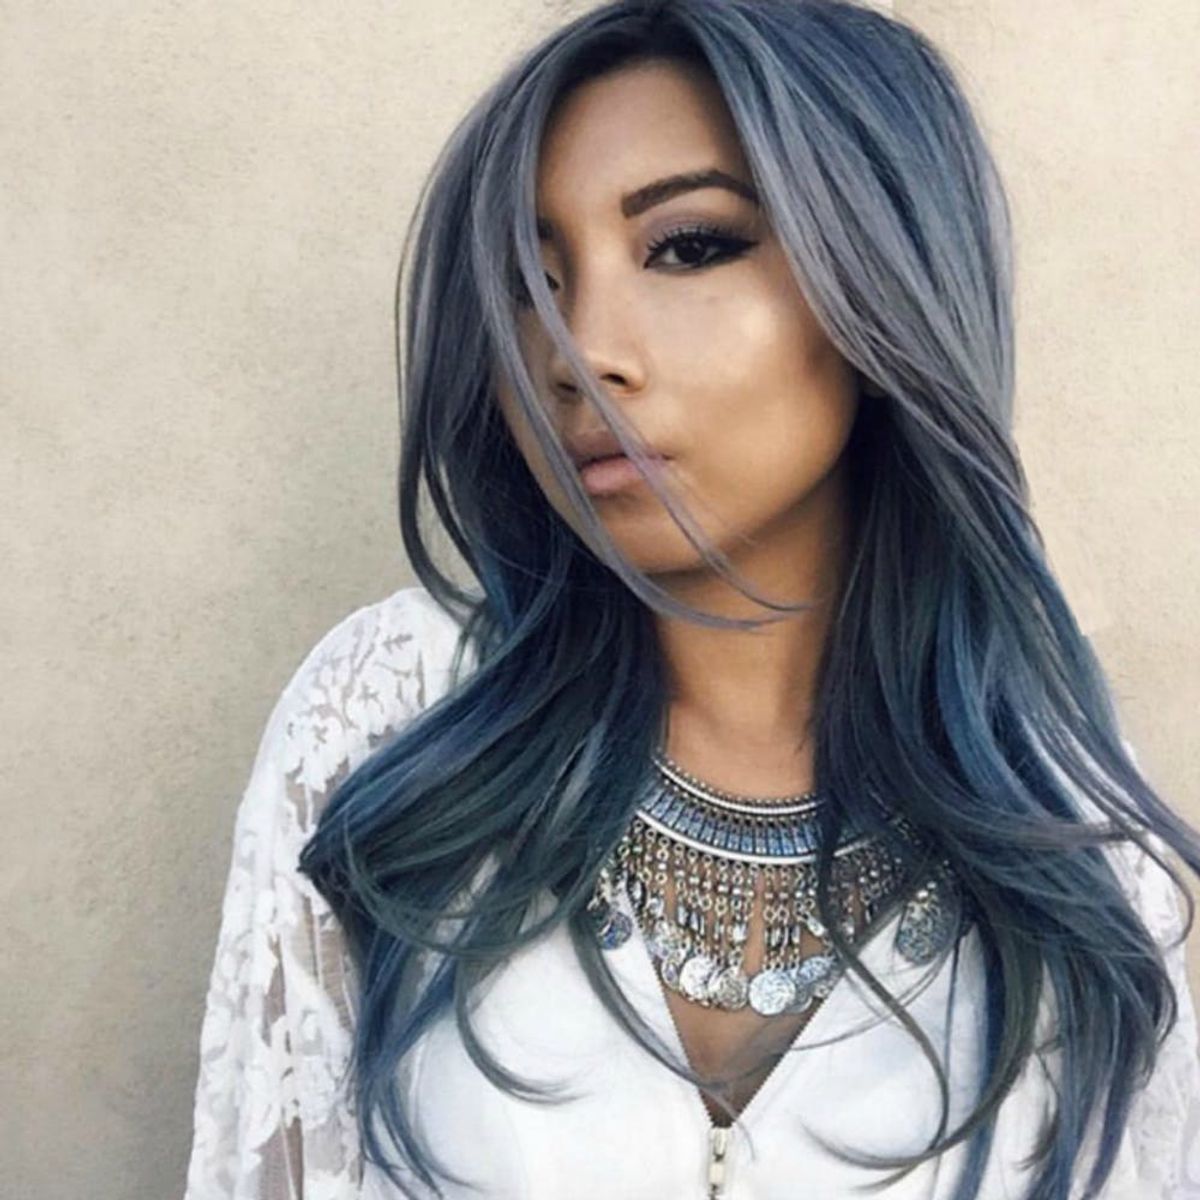 Stone-Washed Denim Hair for the Rock Goddess in All of Us